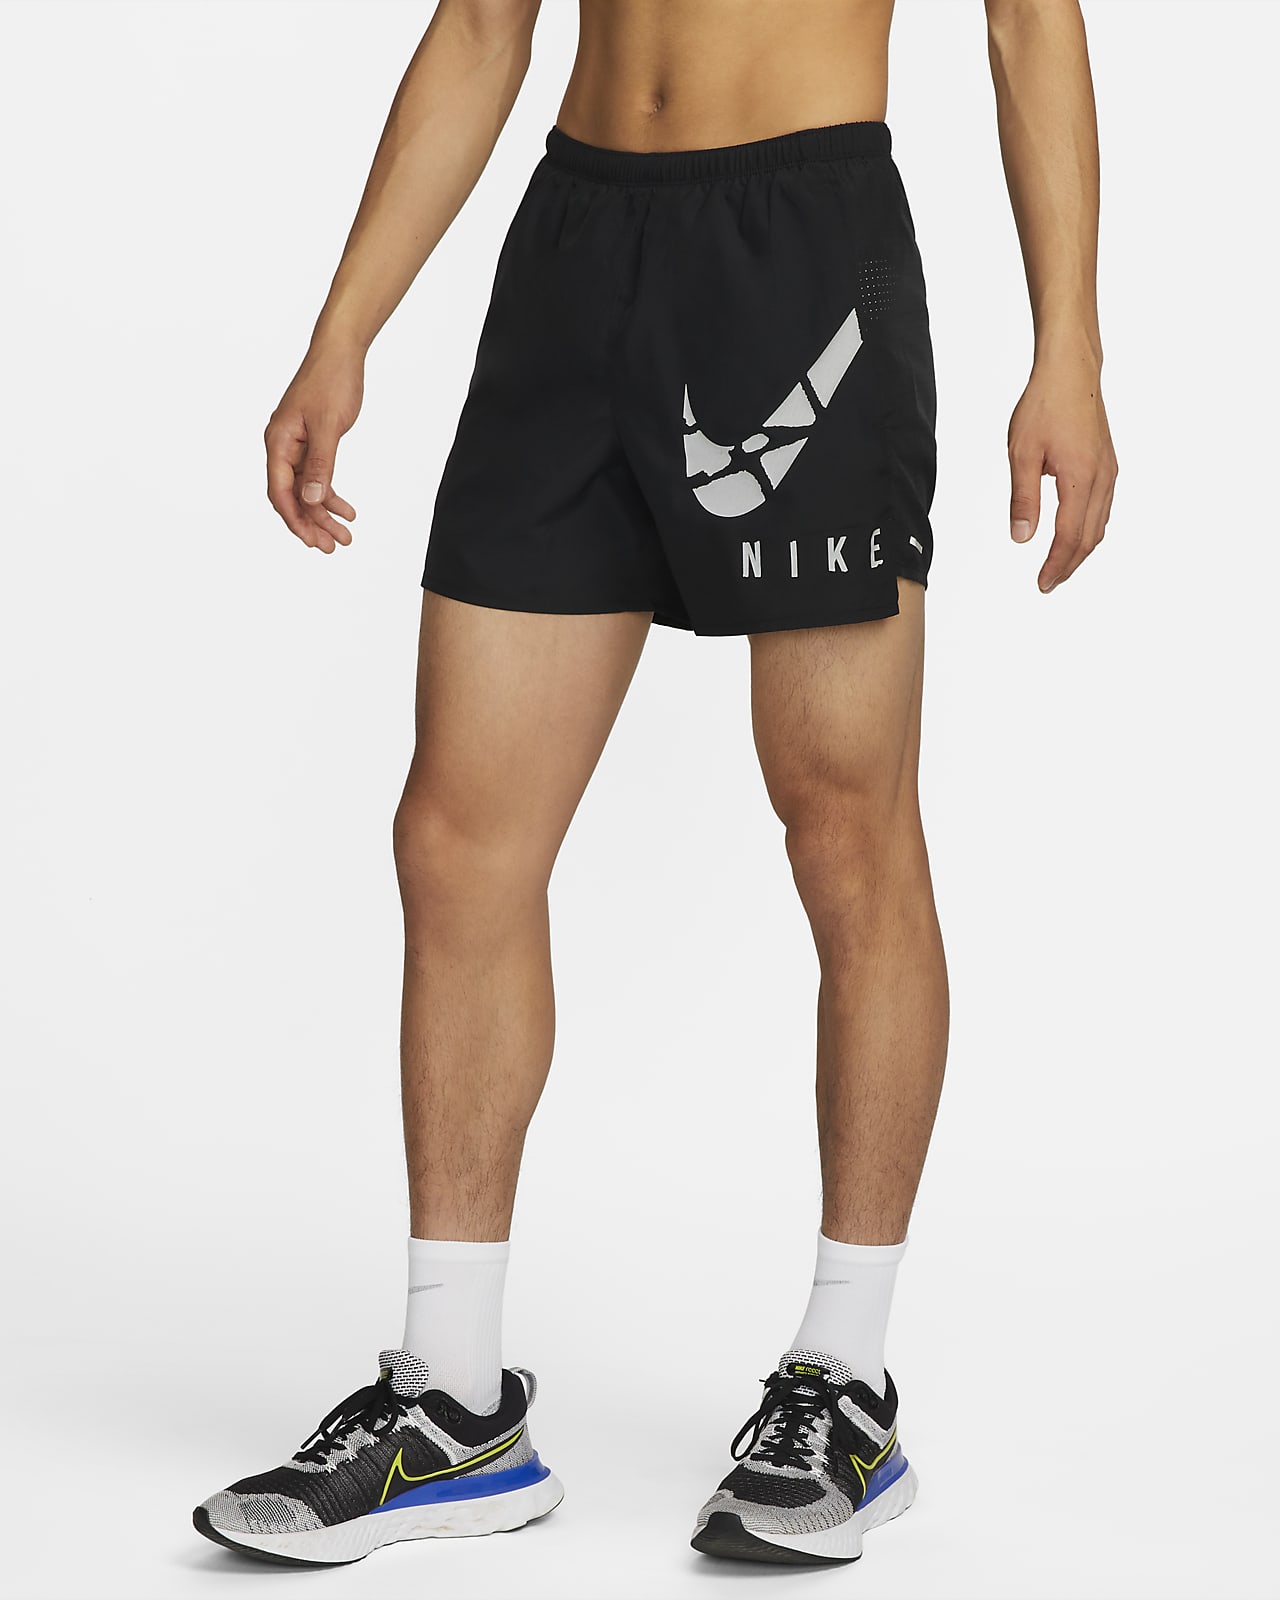 Nike Dri-FIT Challenger Run Division Men's 13cm (approx.) Brief-Lined Running Shorts